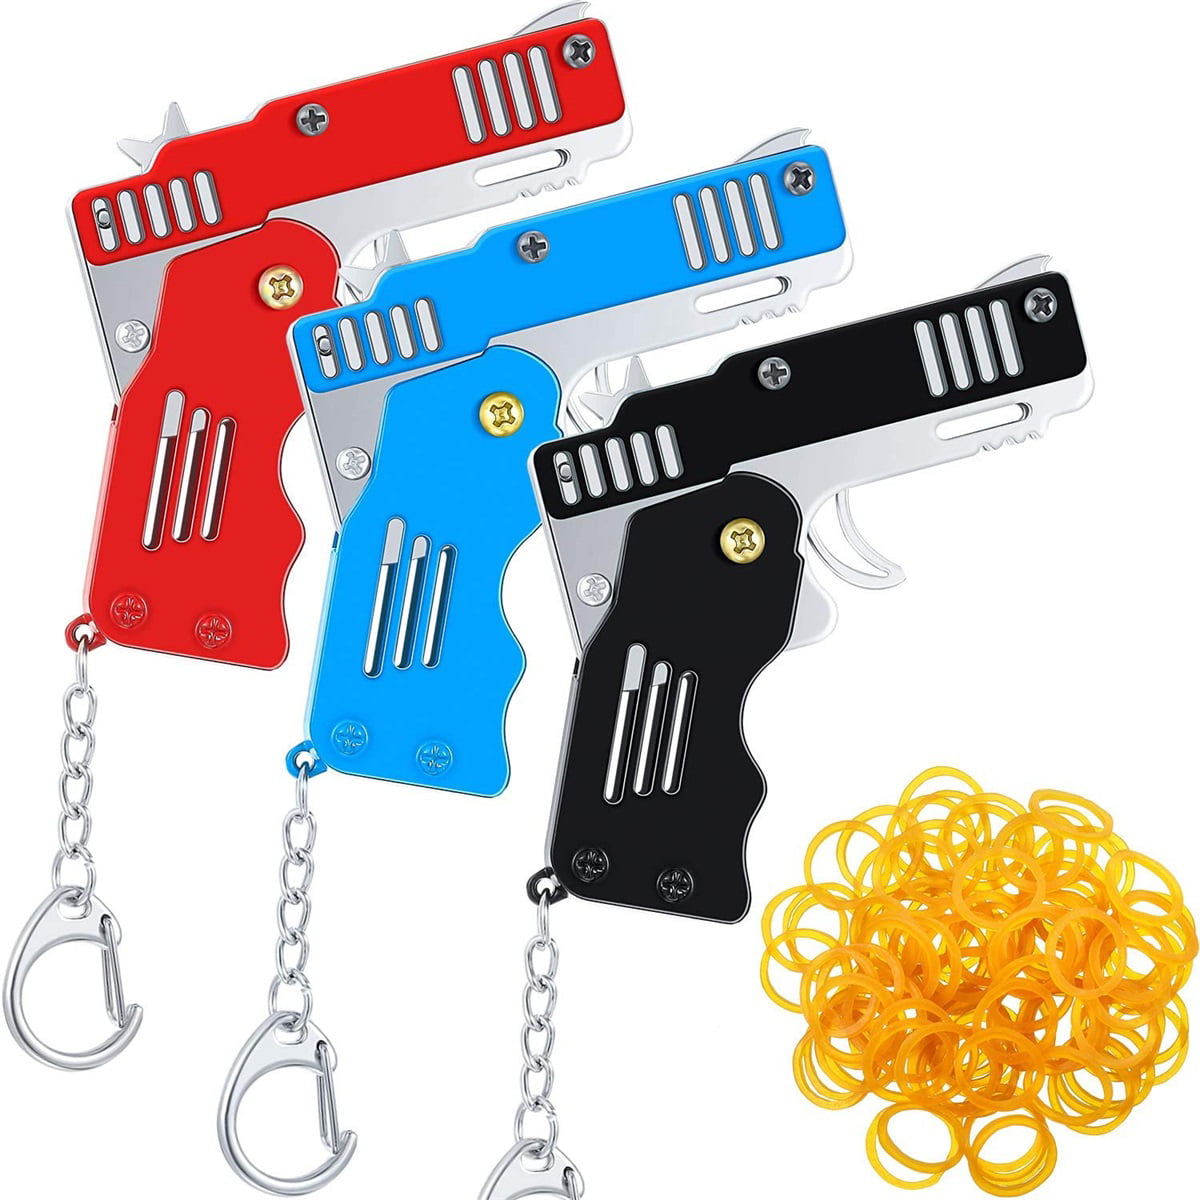 Details about   Rubber Band Gun Mini Metal Folding 6-Shot with Keychain and Rubber Band 100&HOT! 